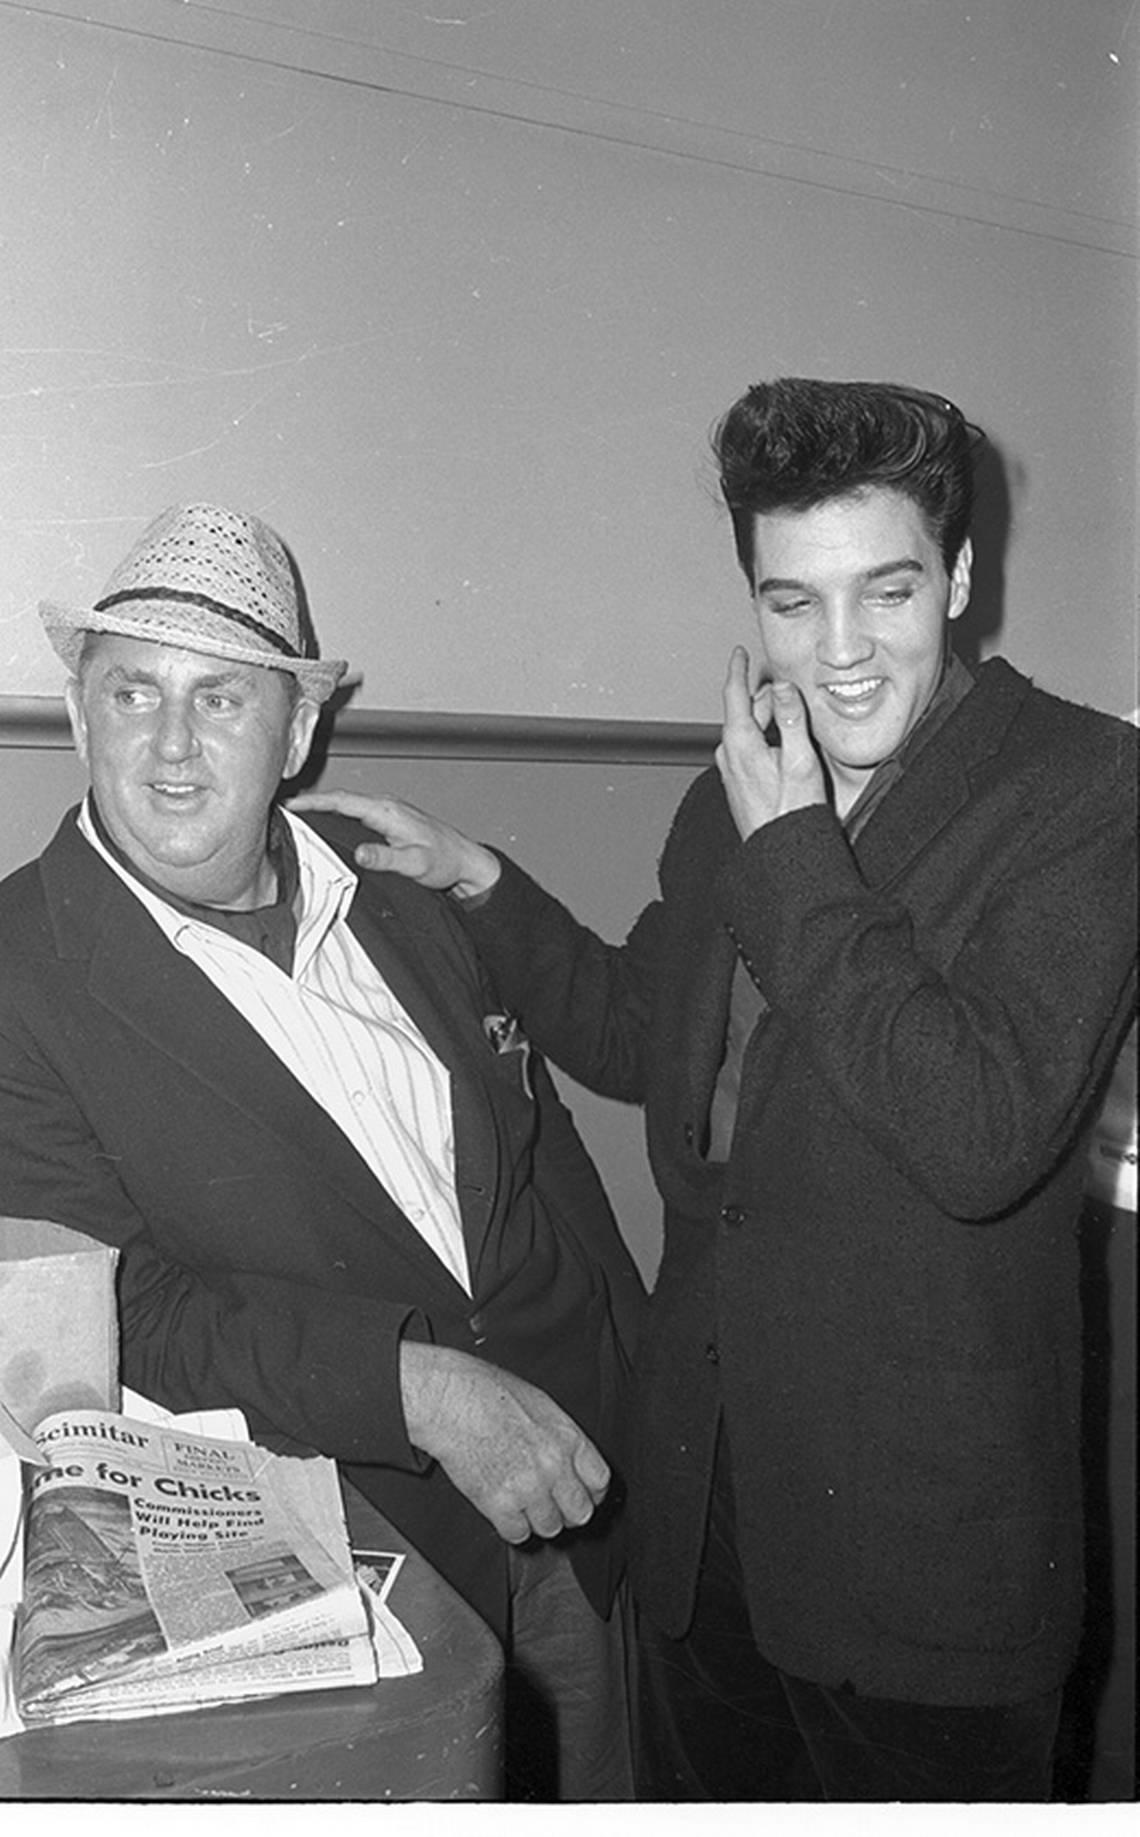 April 19, 1960: Elvis Presley at the T&P train station in Fort Worth on layover en route to Hollywood to make the movie “G.I. Blues.”